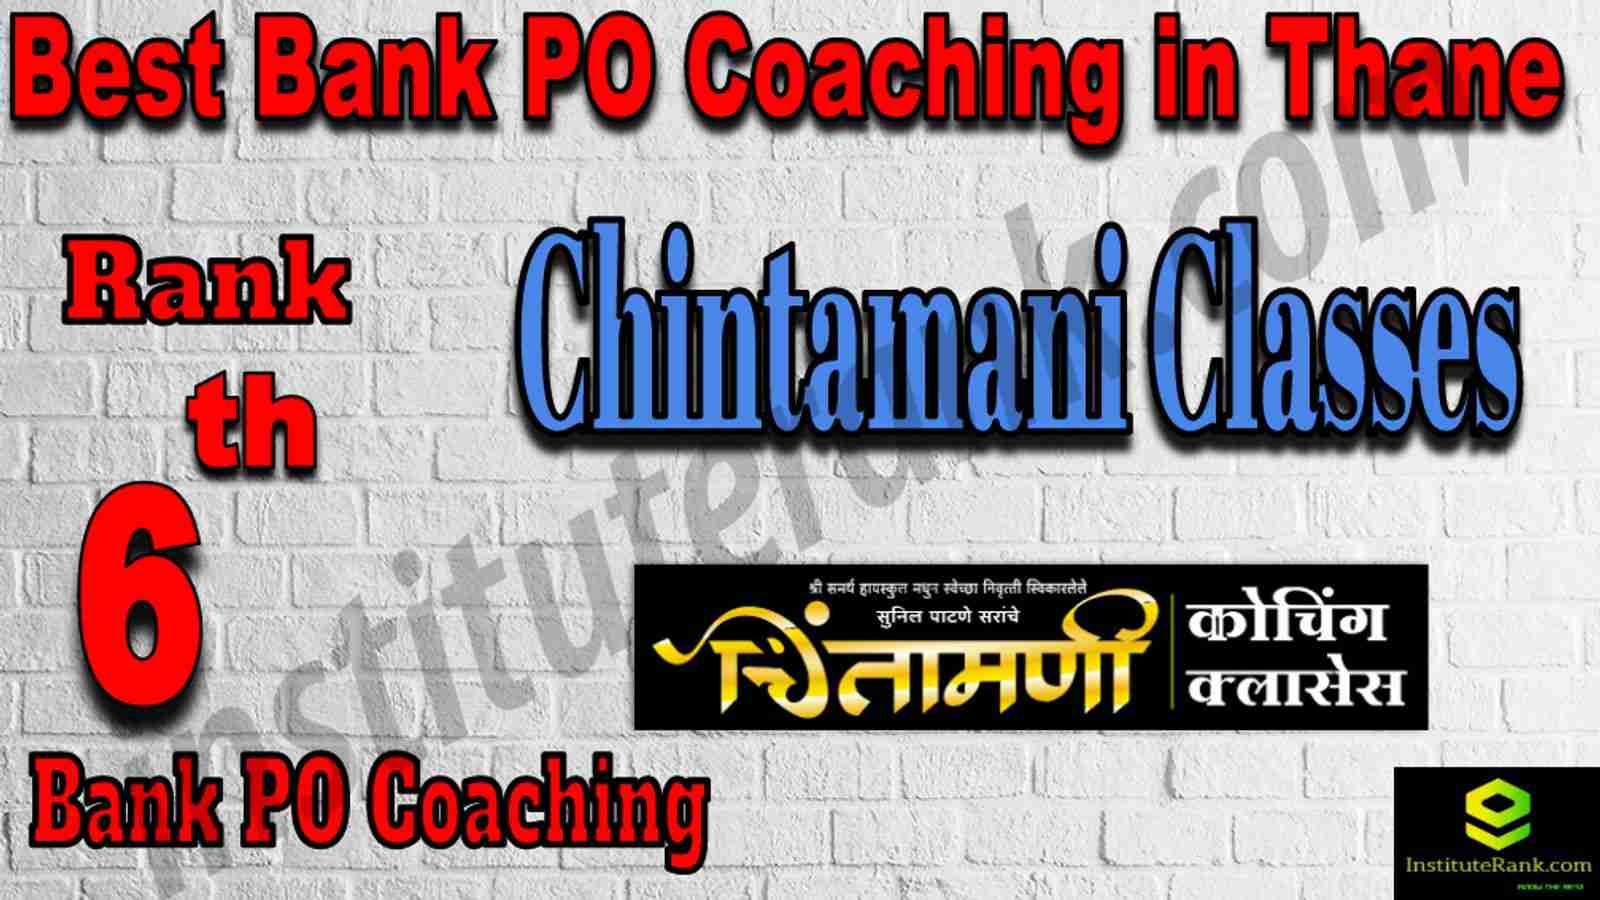 6th Best Bank PO Coaching in Thane